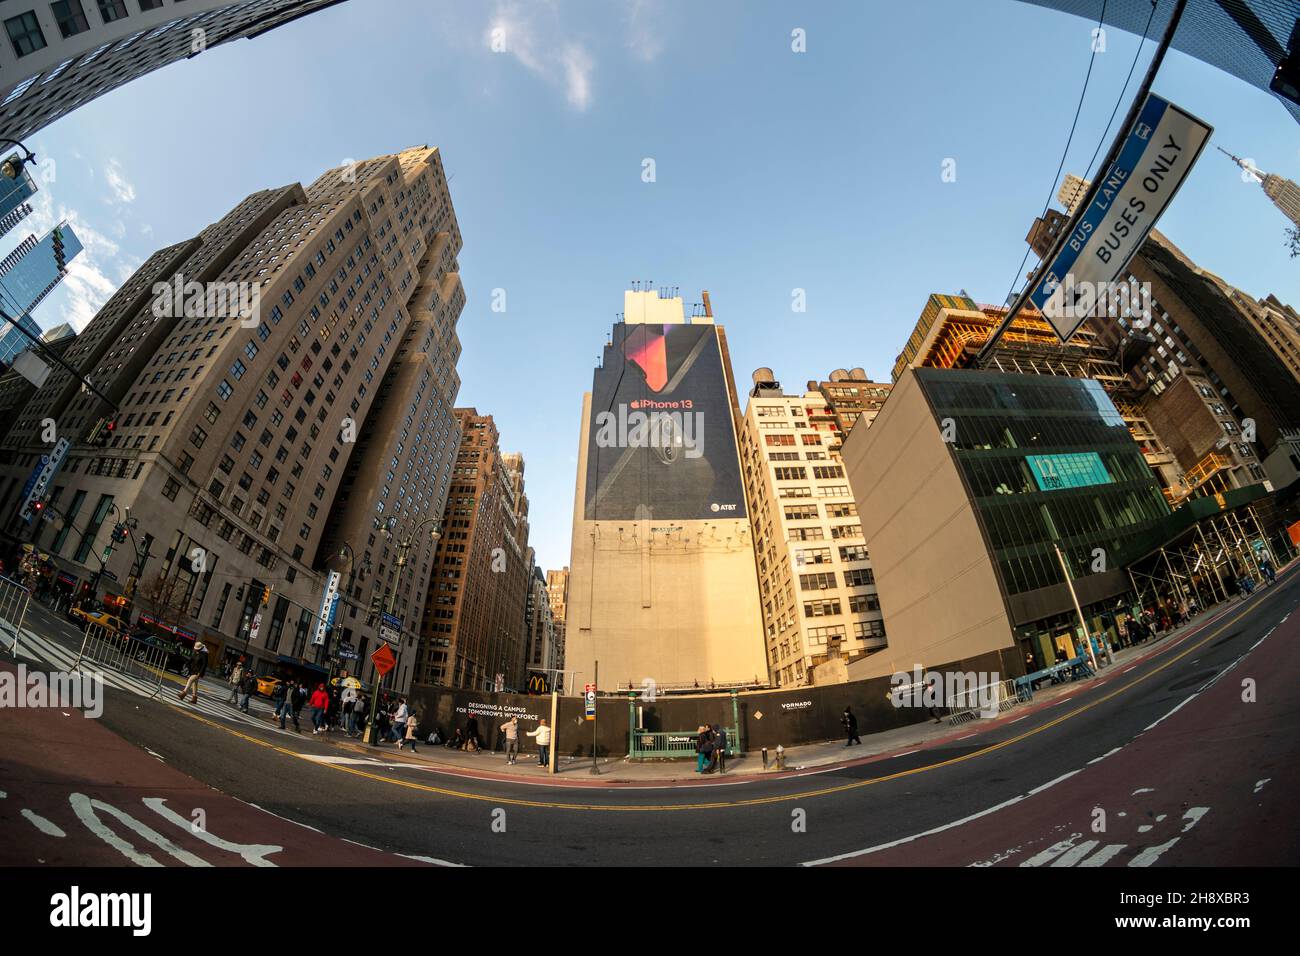 A billboard in Midtown Manhattan in New York on Thursday, November 25, 2021 advertising the iPhone 13.  (© Richard B. Levine) Stock Photo